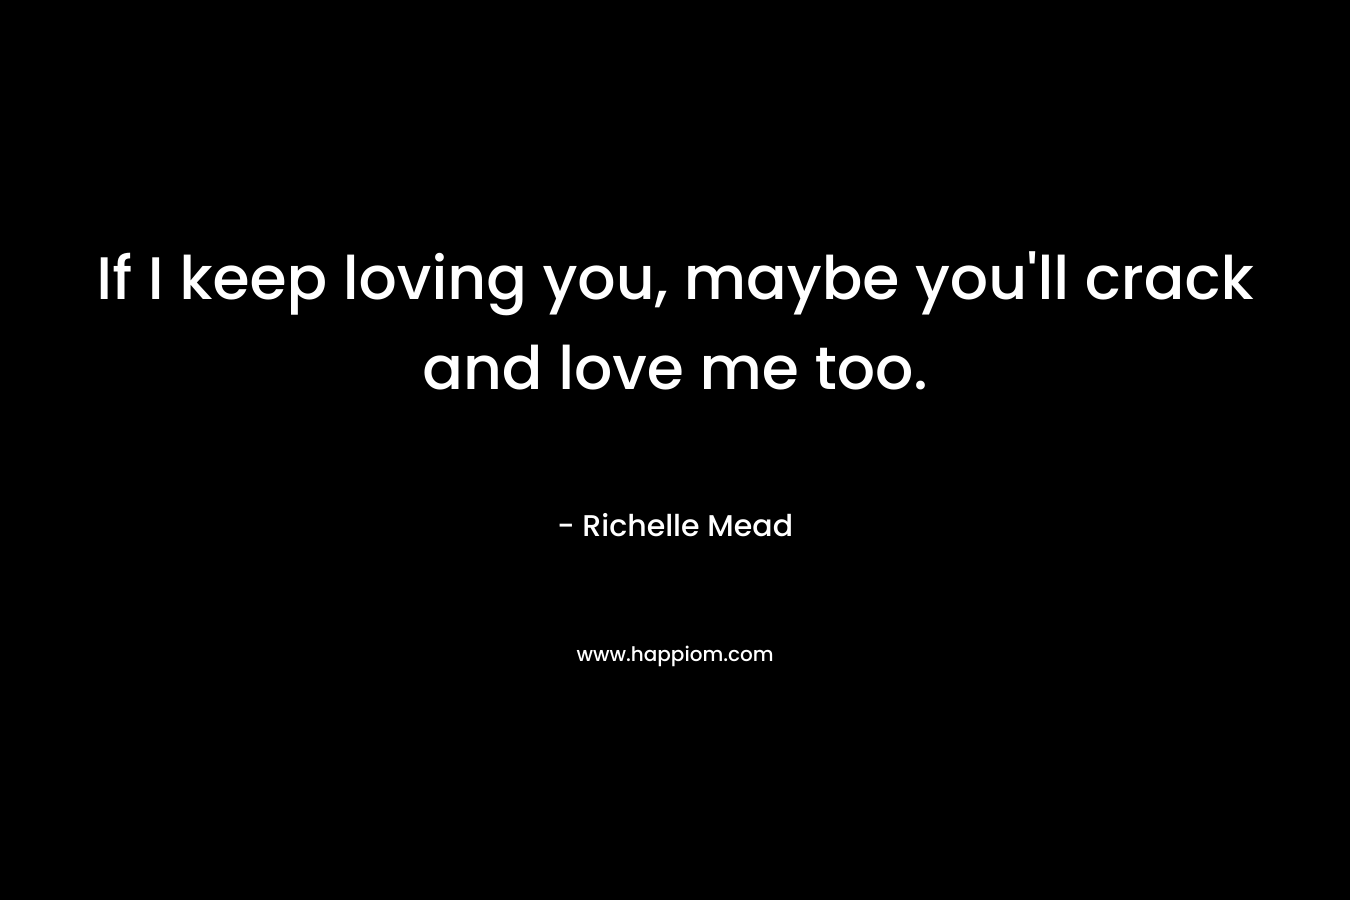 If I keep loving you, maybe you’ll crack and love me too. – Richelle Mead